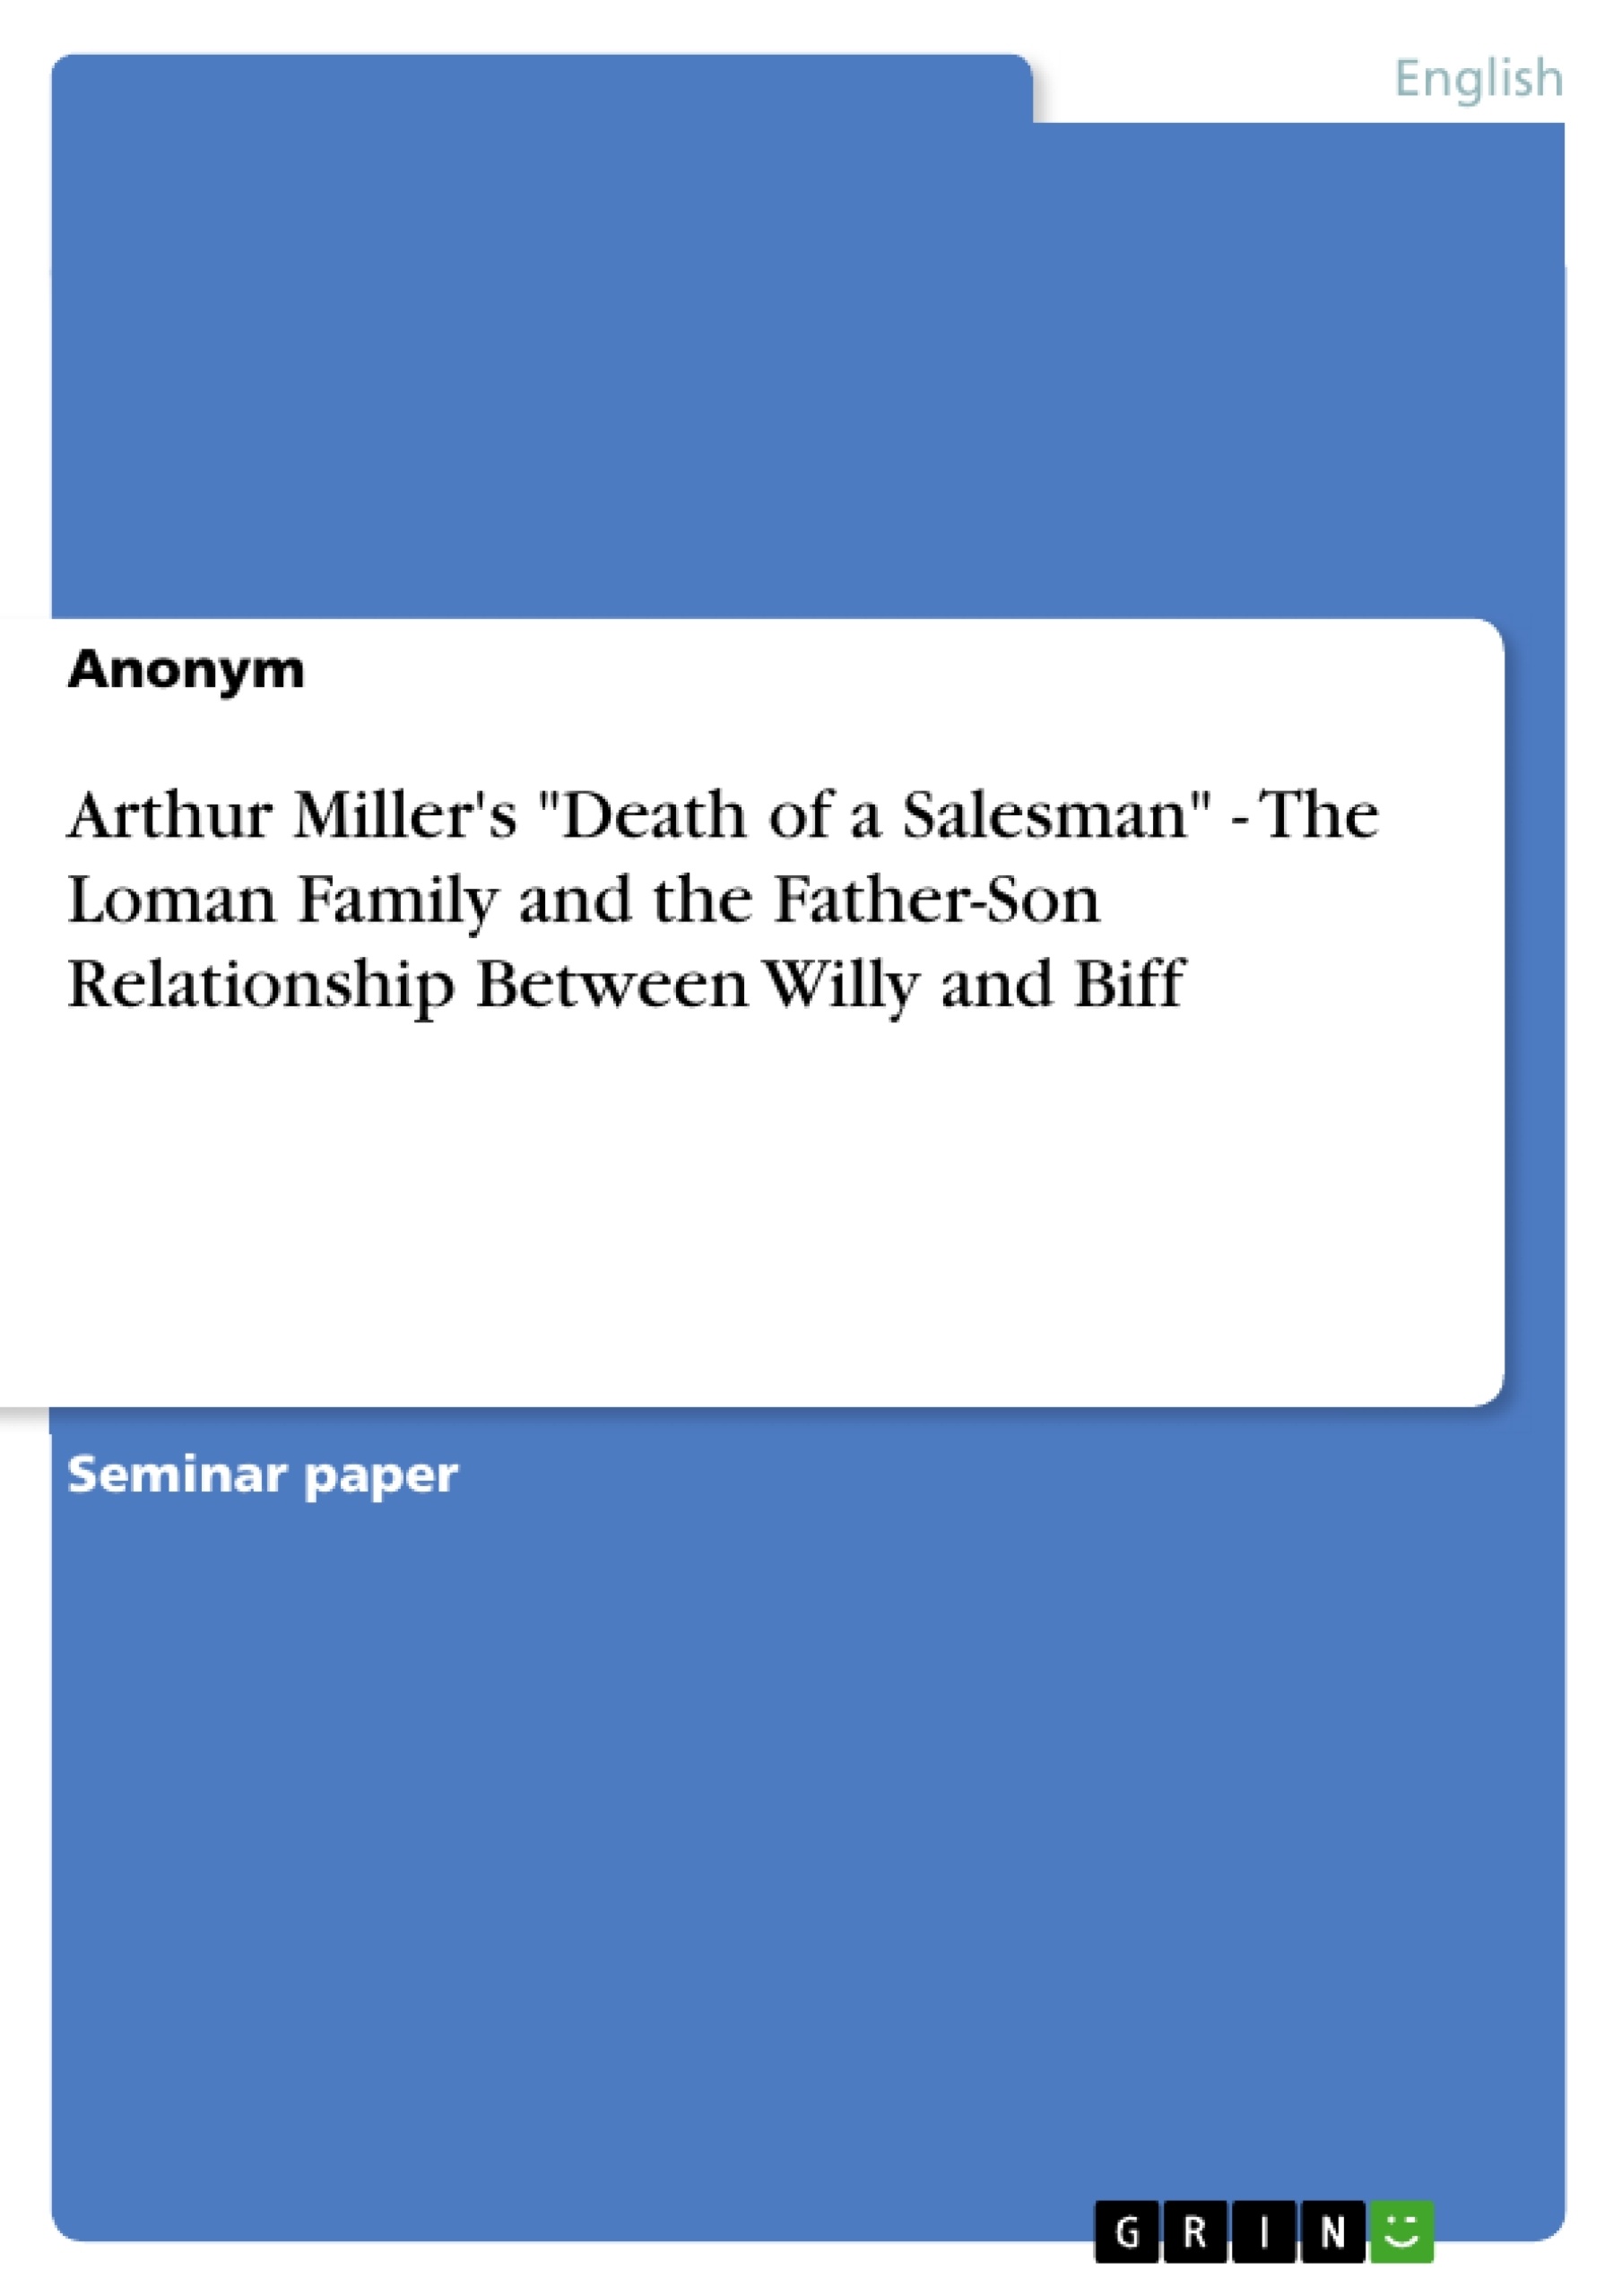 Title: Arthur Miller's "Death of a Salesman" - The Loman Family and the Father-Son Relationship Between Willy and Biff